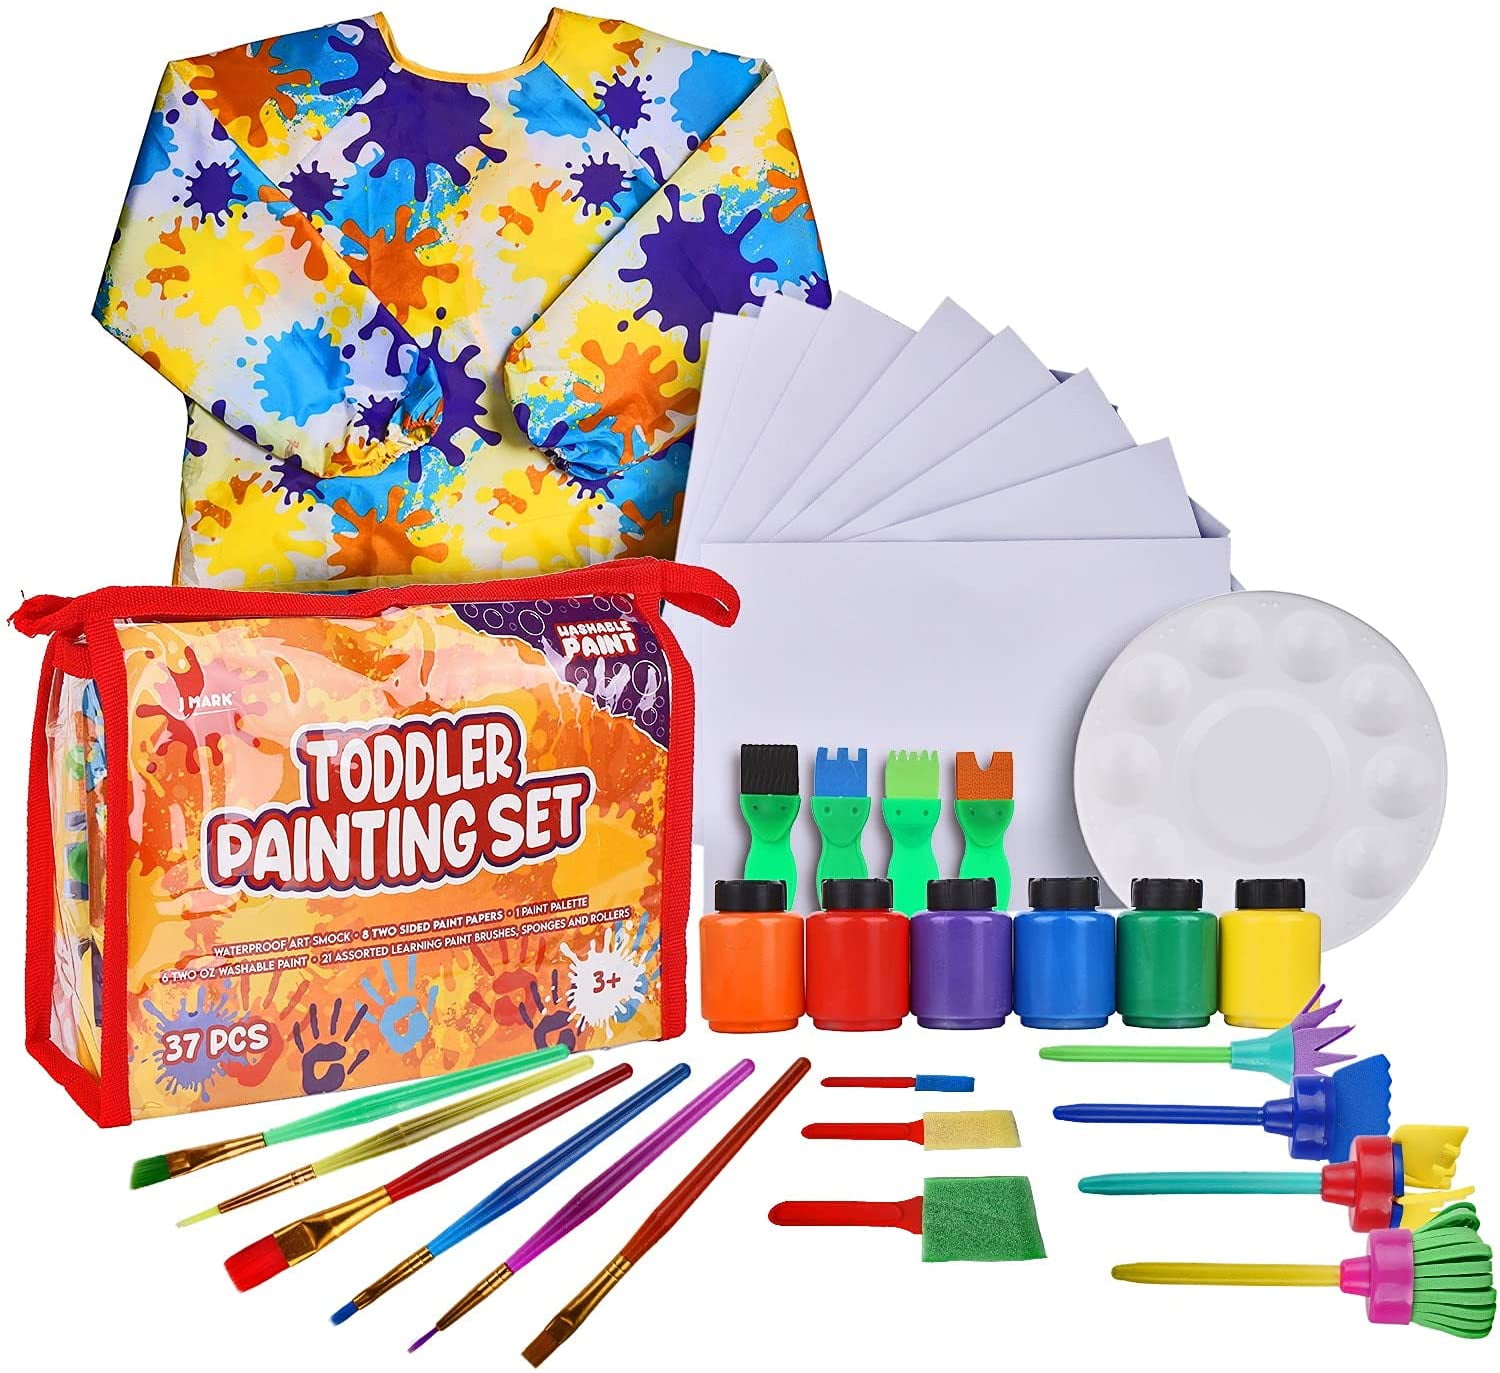 Joyin 48 Pieces Art Painting Supplies for Toddlers and Kids with 12 Paint Brushes, 10 Painting Canvas, 2 Tabletop Easels, 2 Art Smocks, 18 Acrylic